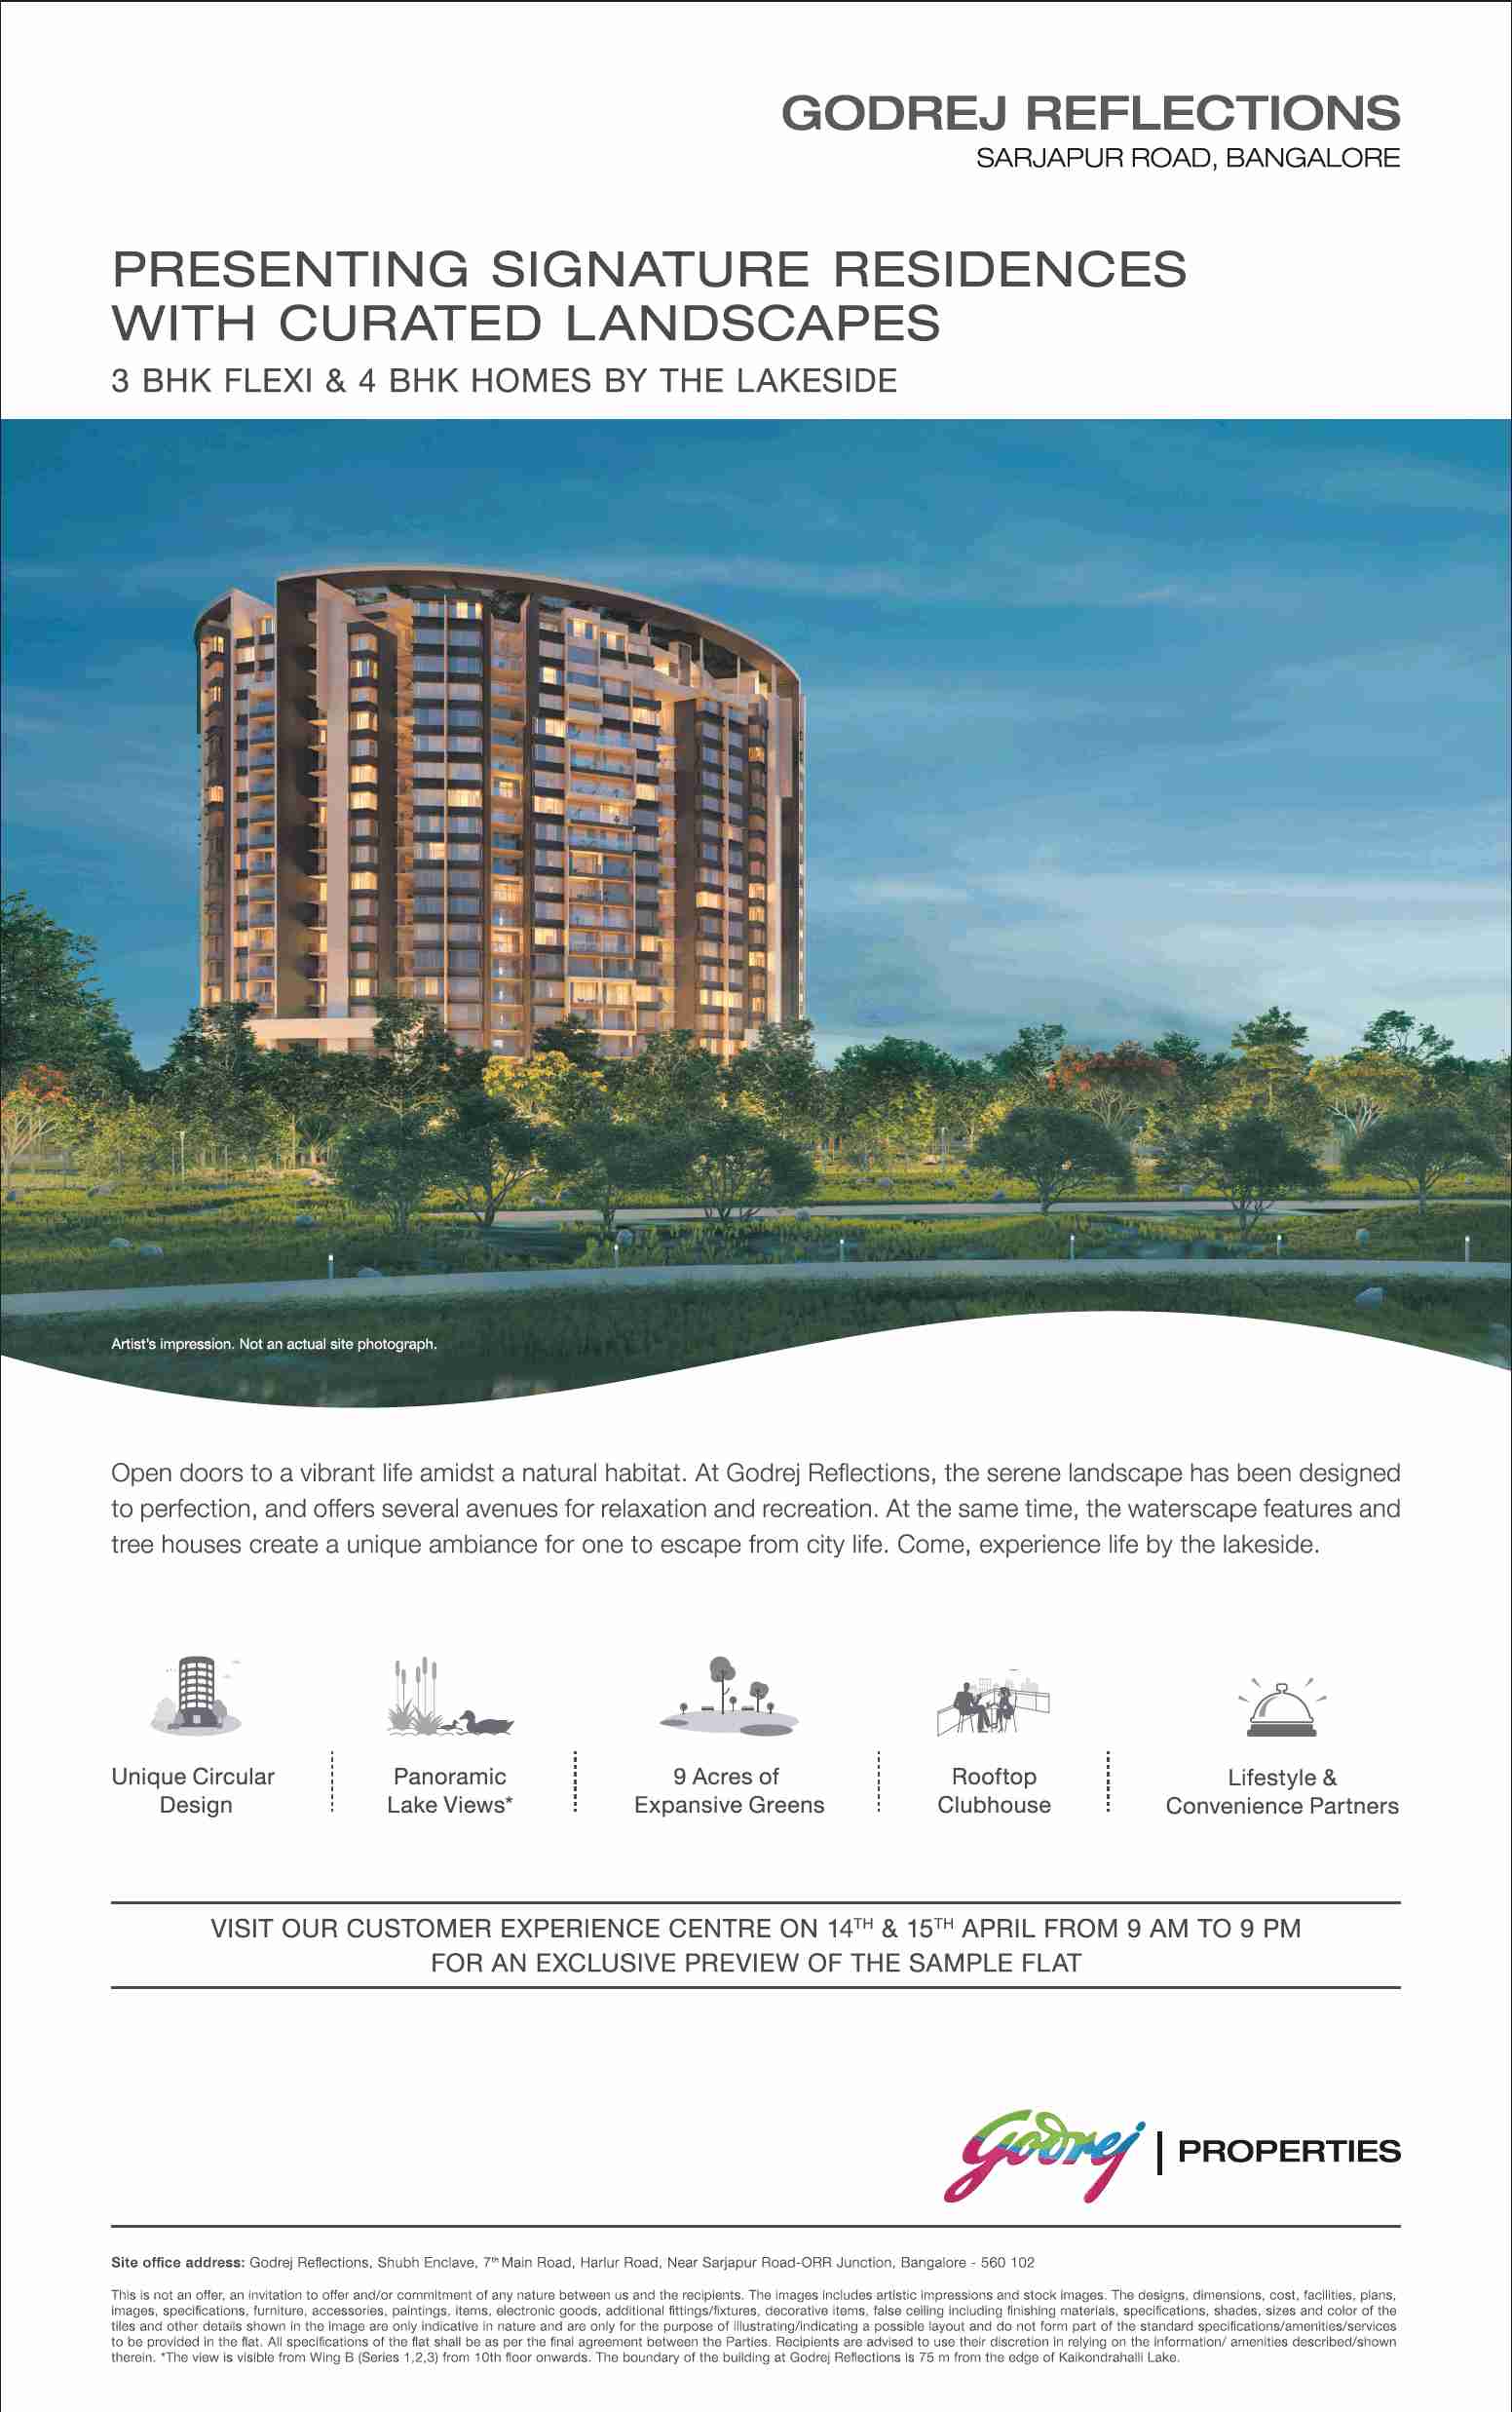 Live in signature residences with curated landscapes at Godrej Reflections in Bangalore